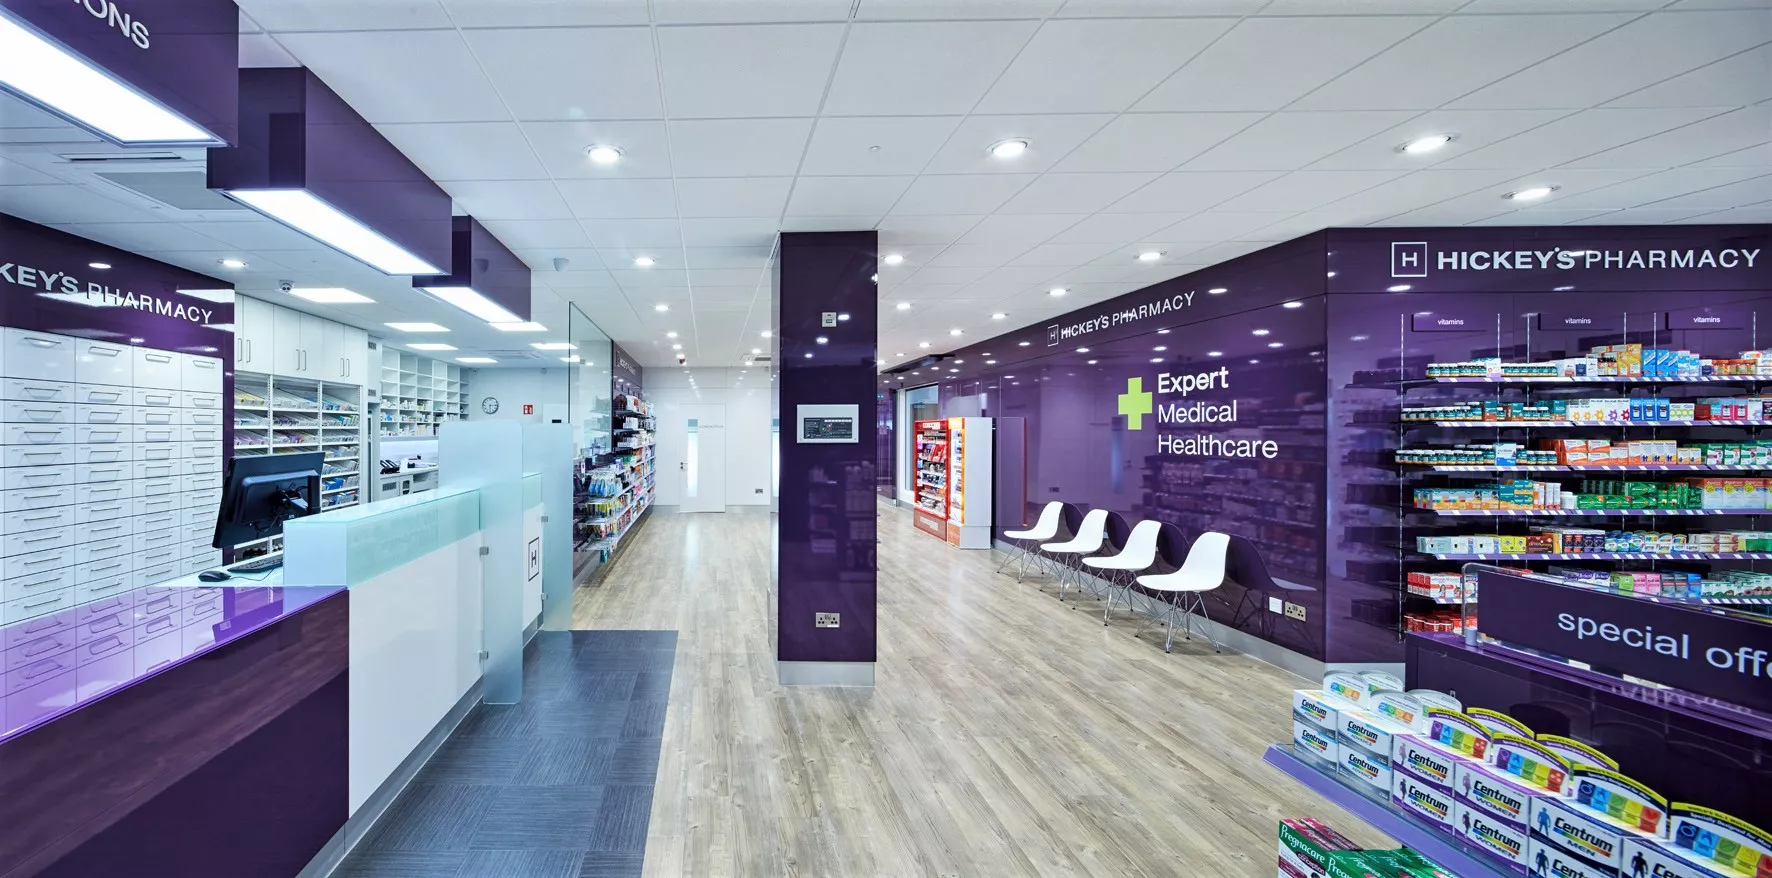 Hickey's Pharmacy in Ireland, Europe  - Rated 3.5